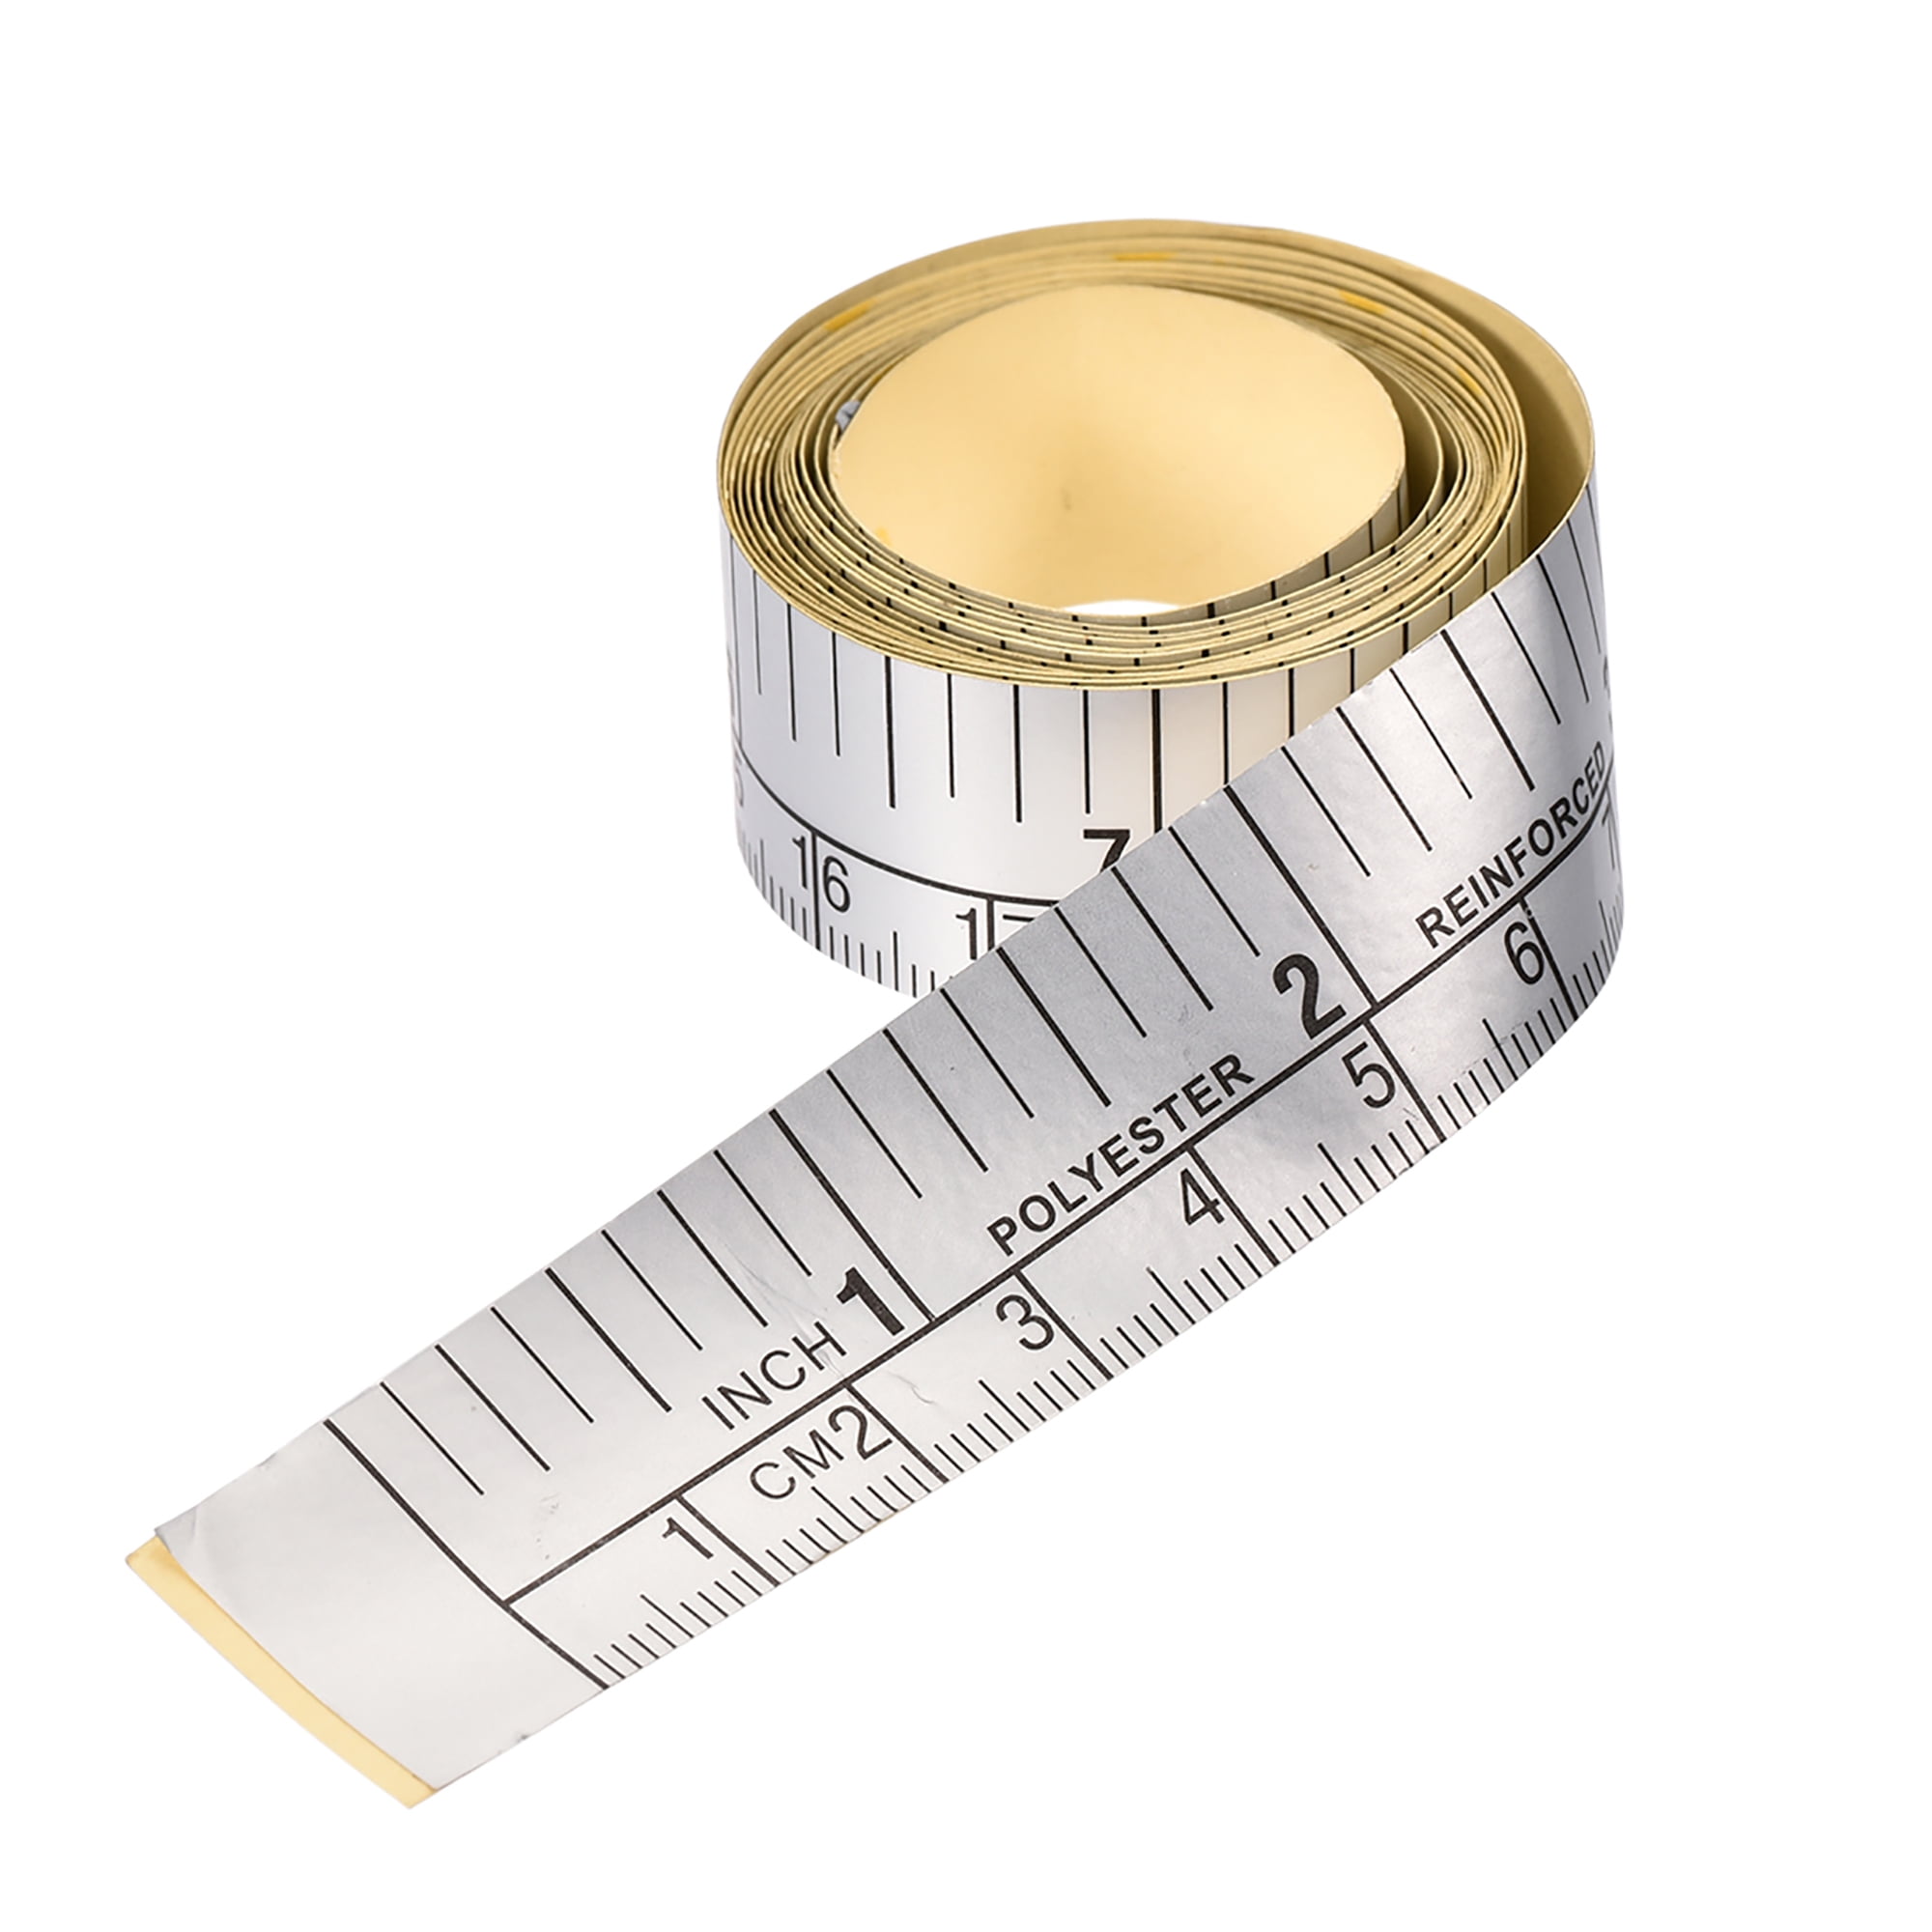 What Measurement Does A Measuring Tape Use